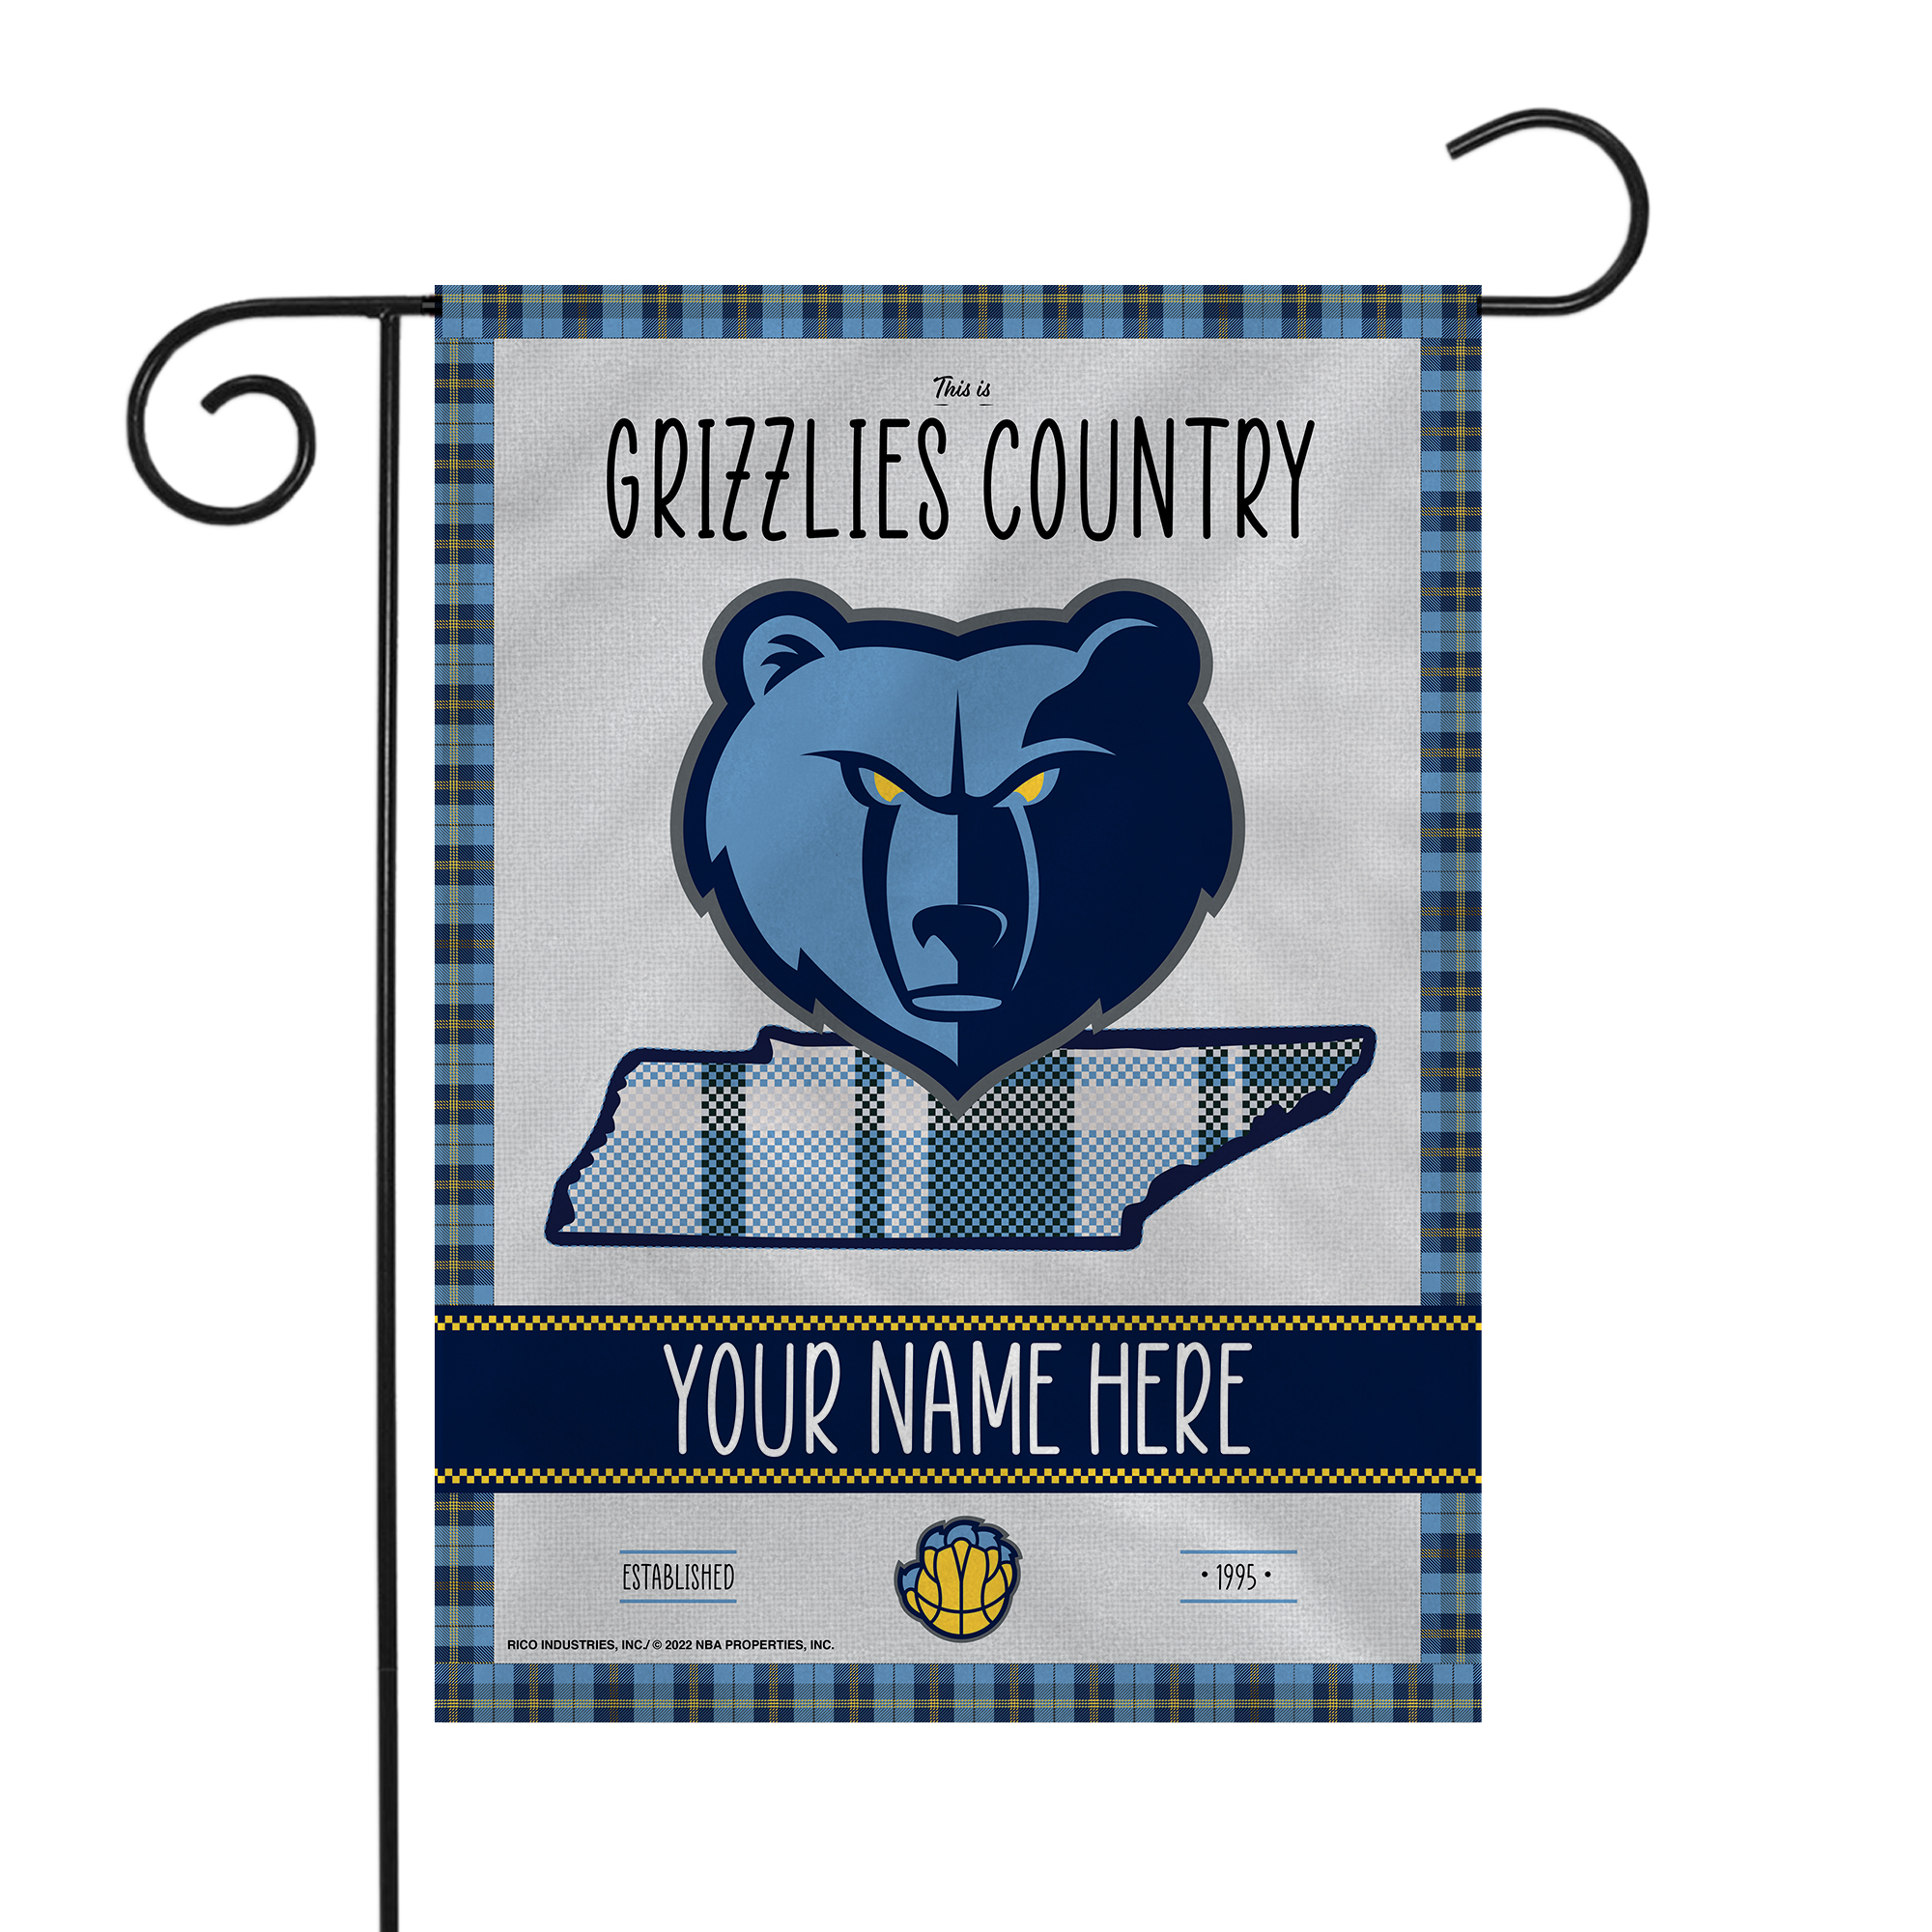 Rico Industries NBA Basketball Memphis Grizzlies This is Grizzlies Country - Plaid Design Personalized Garden Flag